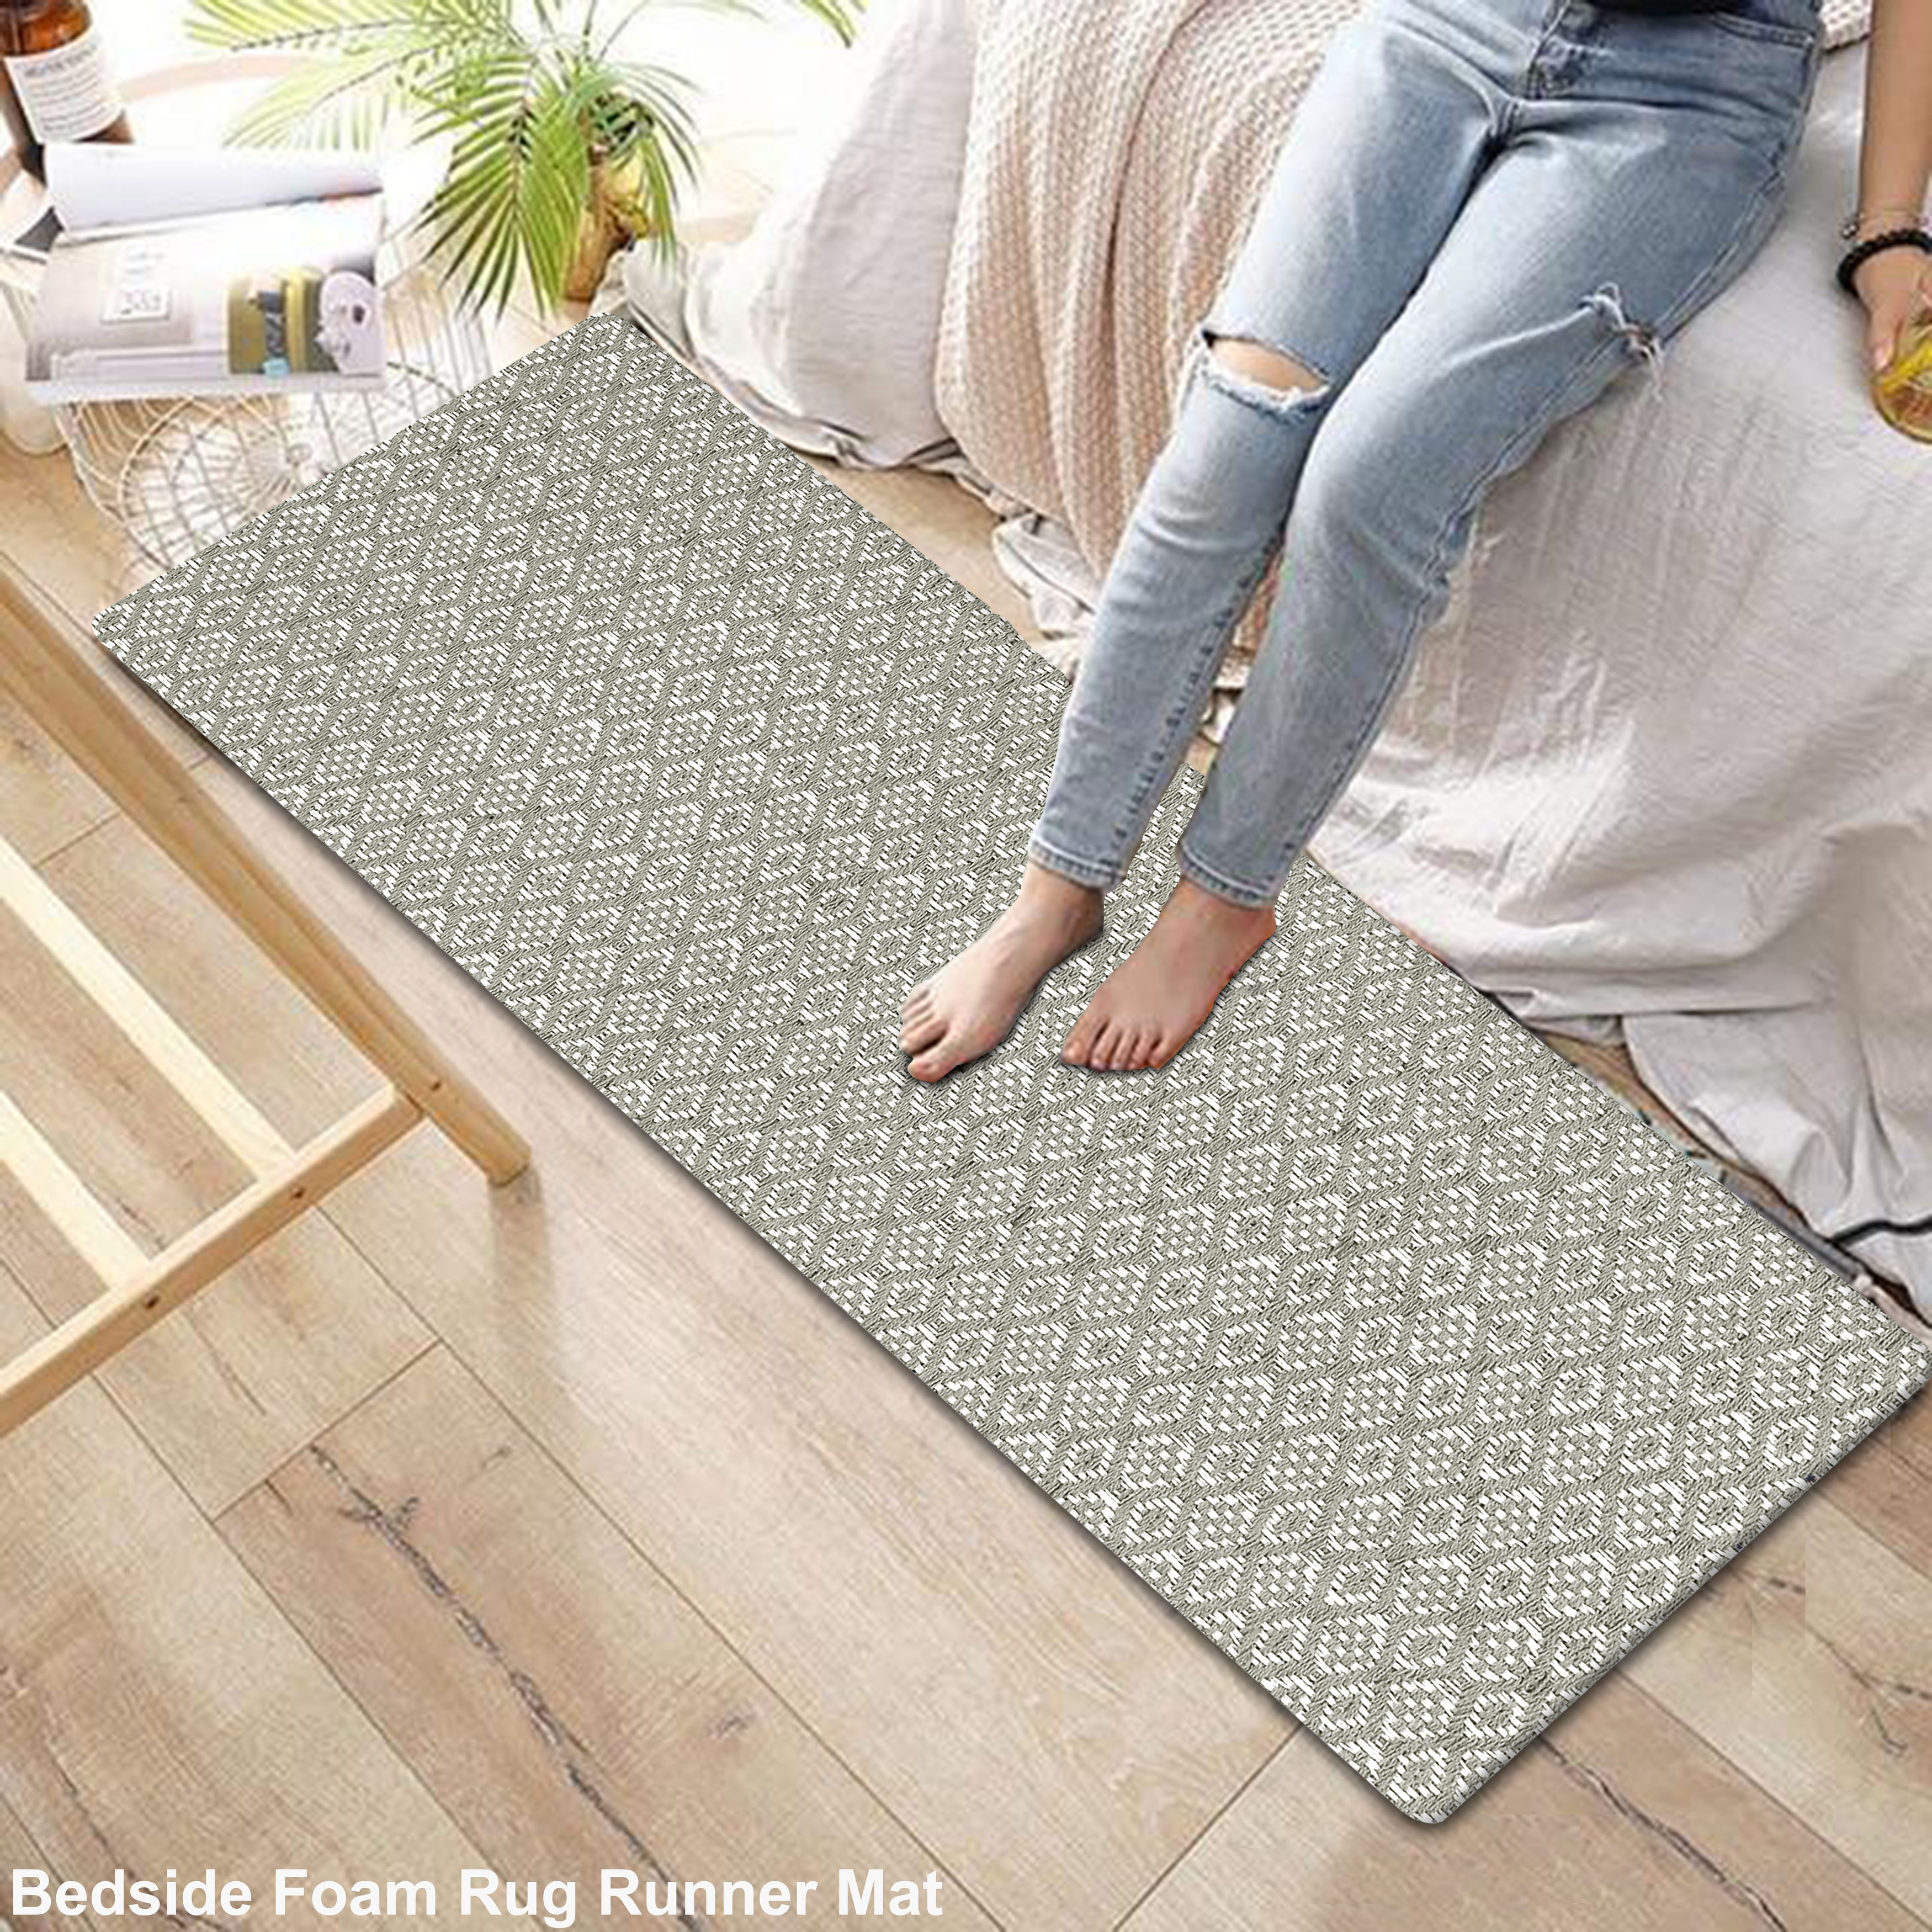 https://ak1.ostkcdn.com/images/products/is/images/direct/ae1422befa204e8e084091f93c5ff6489eee98e4/Kitchen-Runner-Rug--Mat-Cushioned-Cotton-Hand-Woven-Anti-Fatigue-Mat-Kitchen-Bathroom-Bed-side-18x48%27%27.jpg